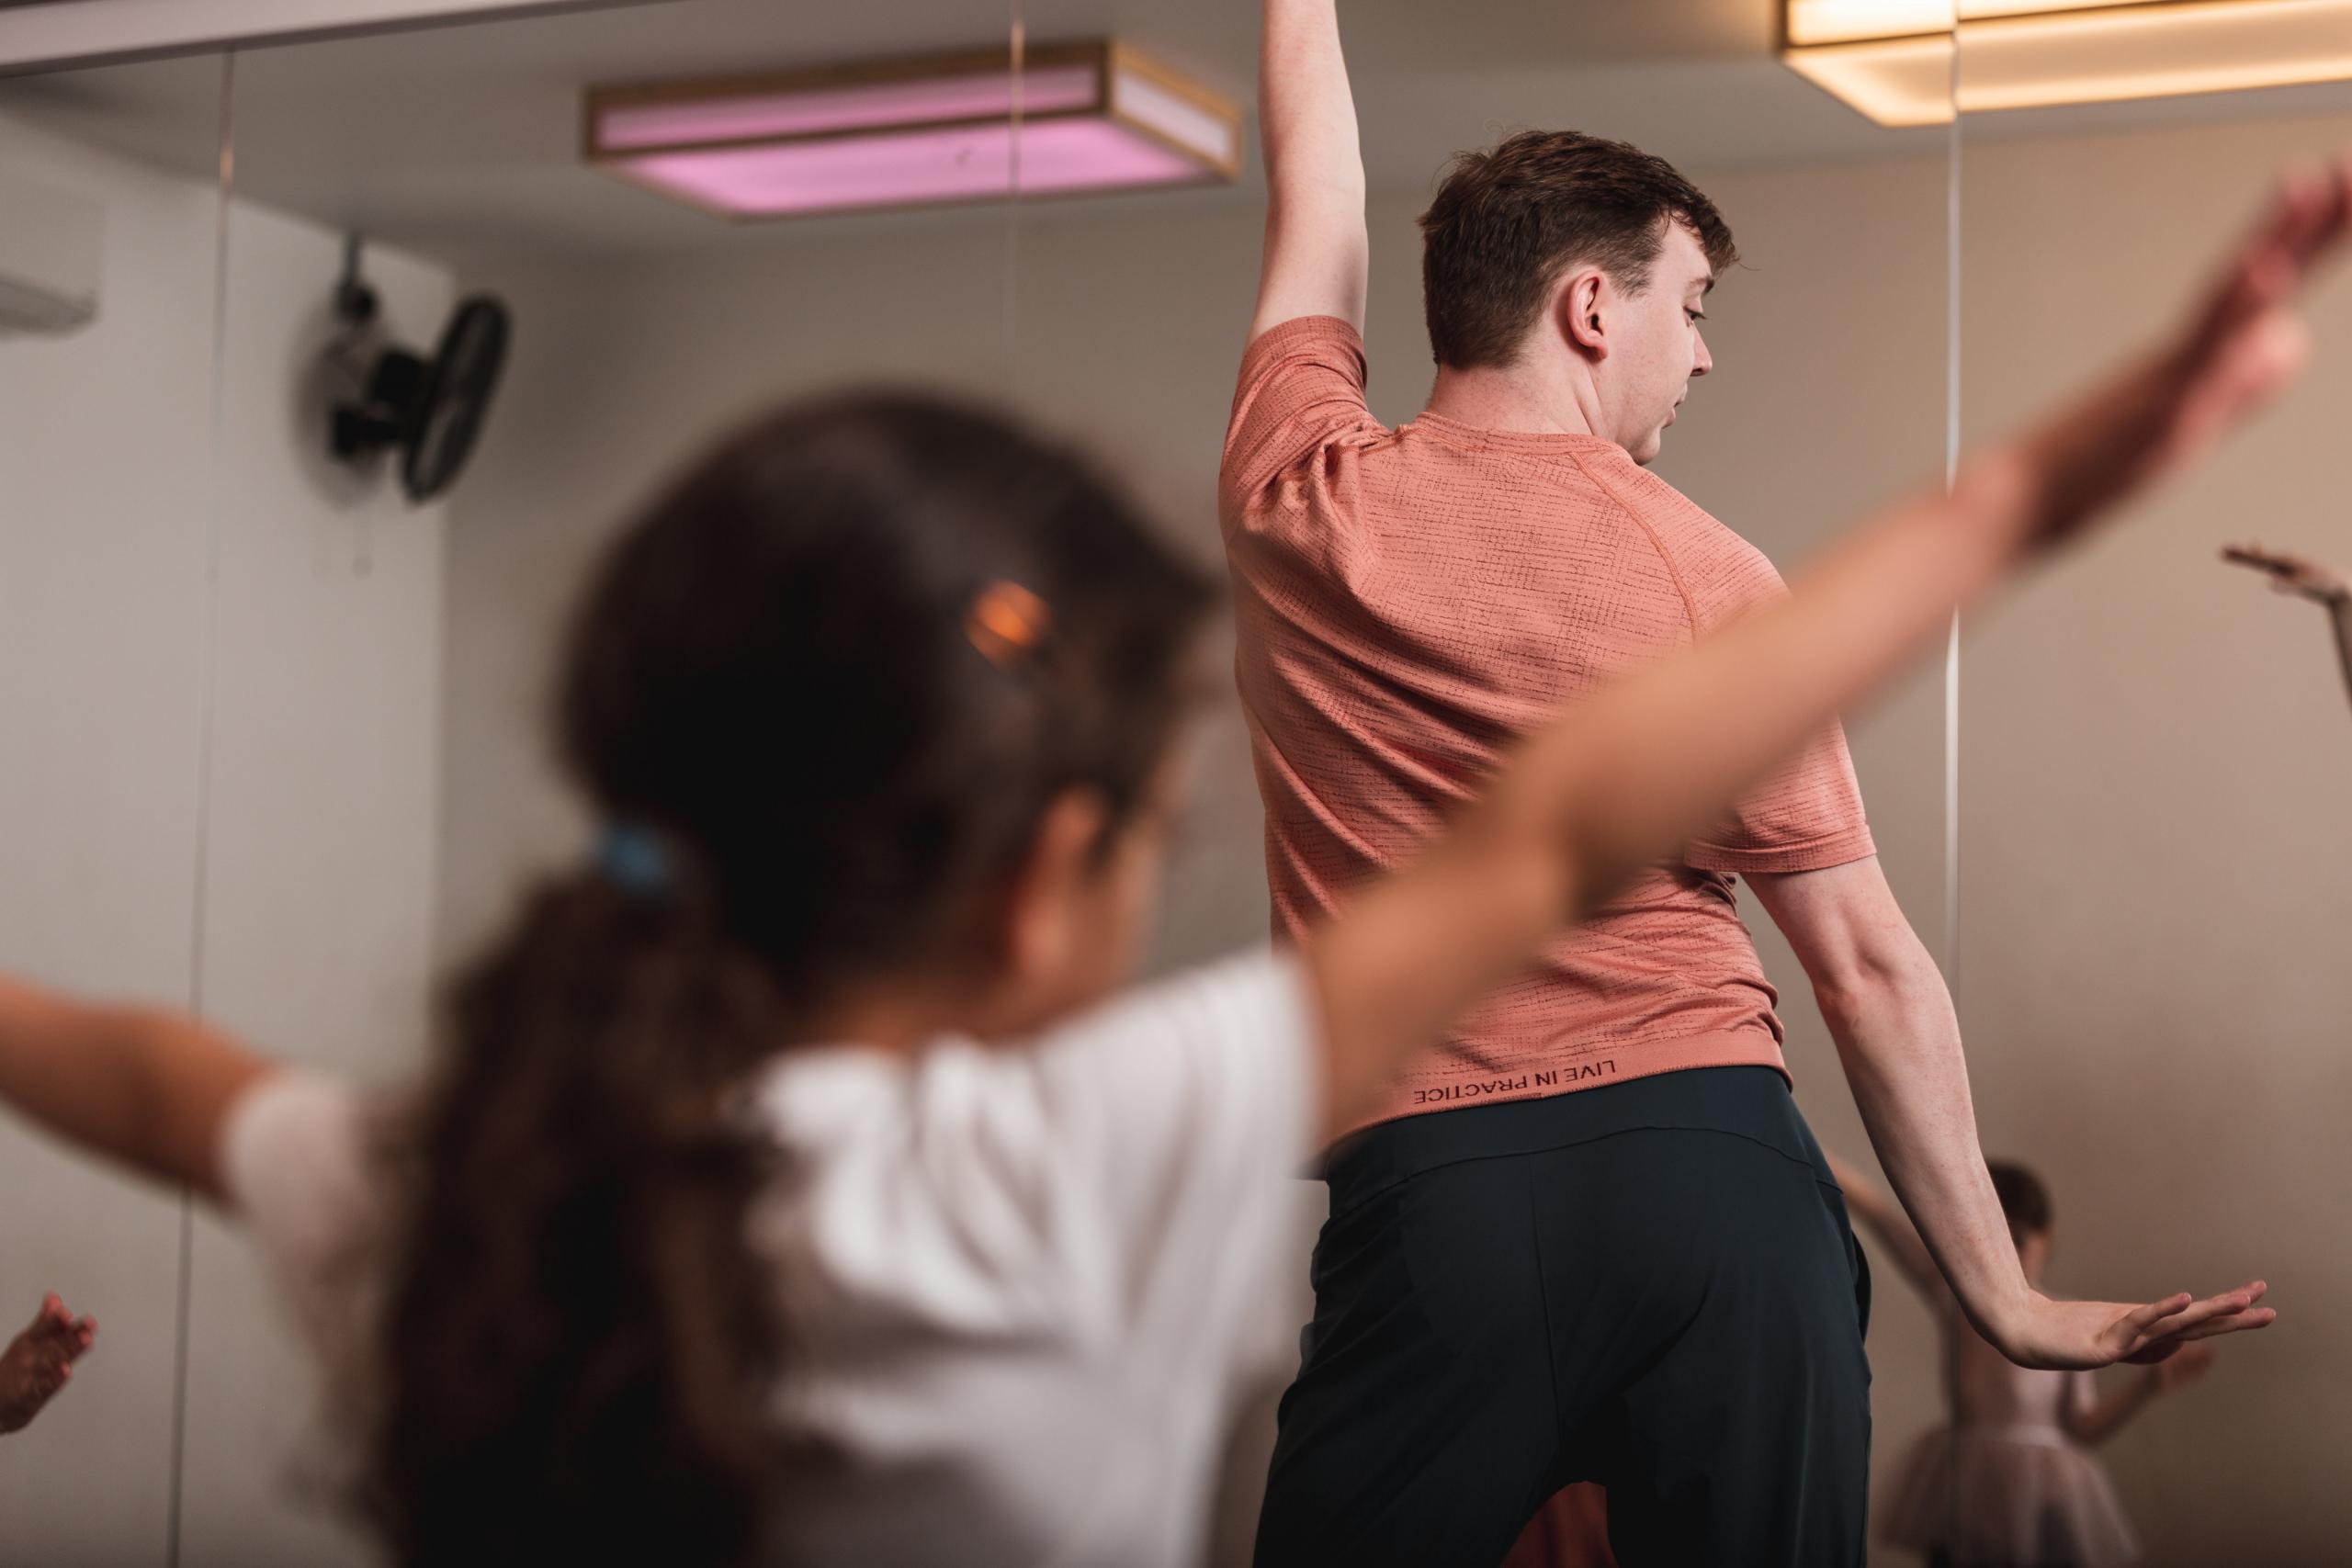 Learn Beginner Ballet & Contemporary Dances At This East London Dance School